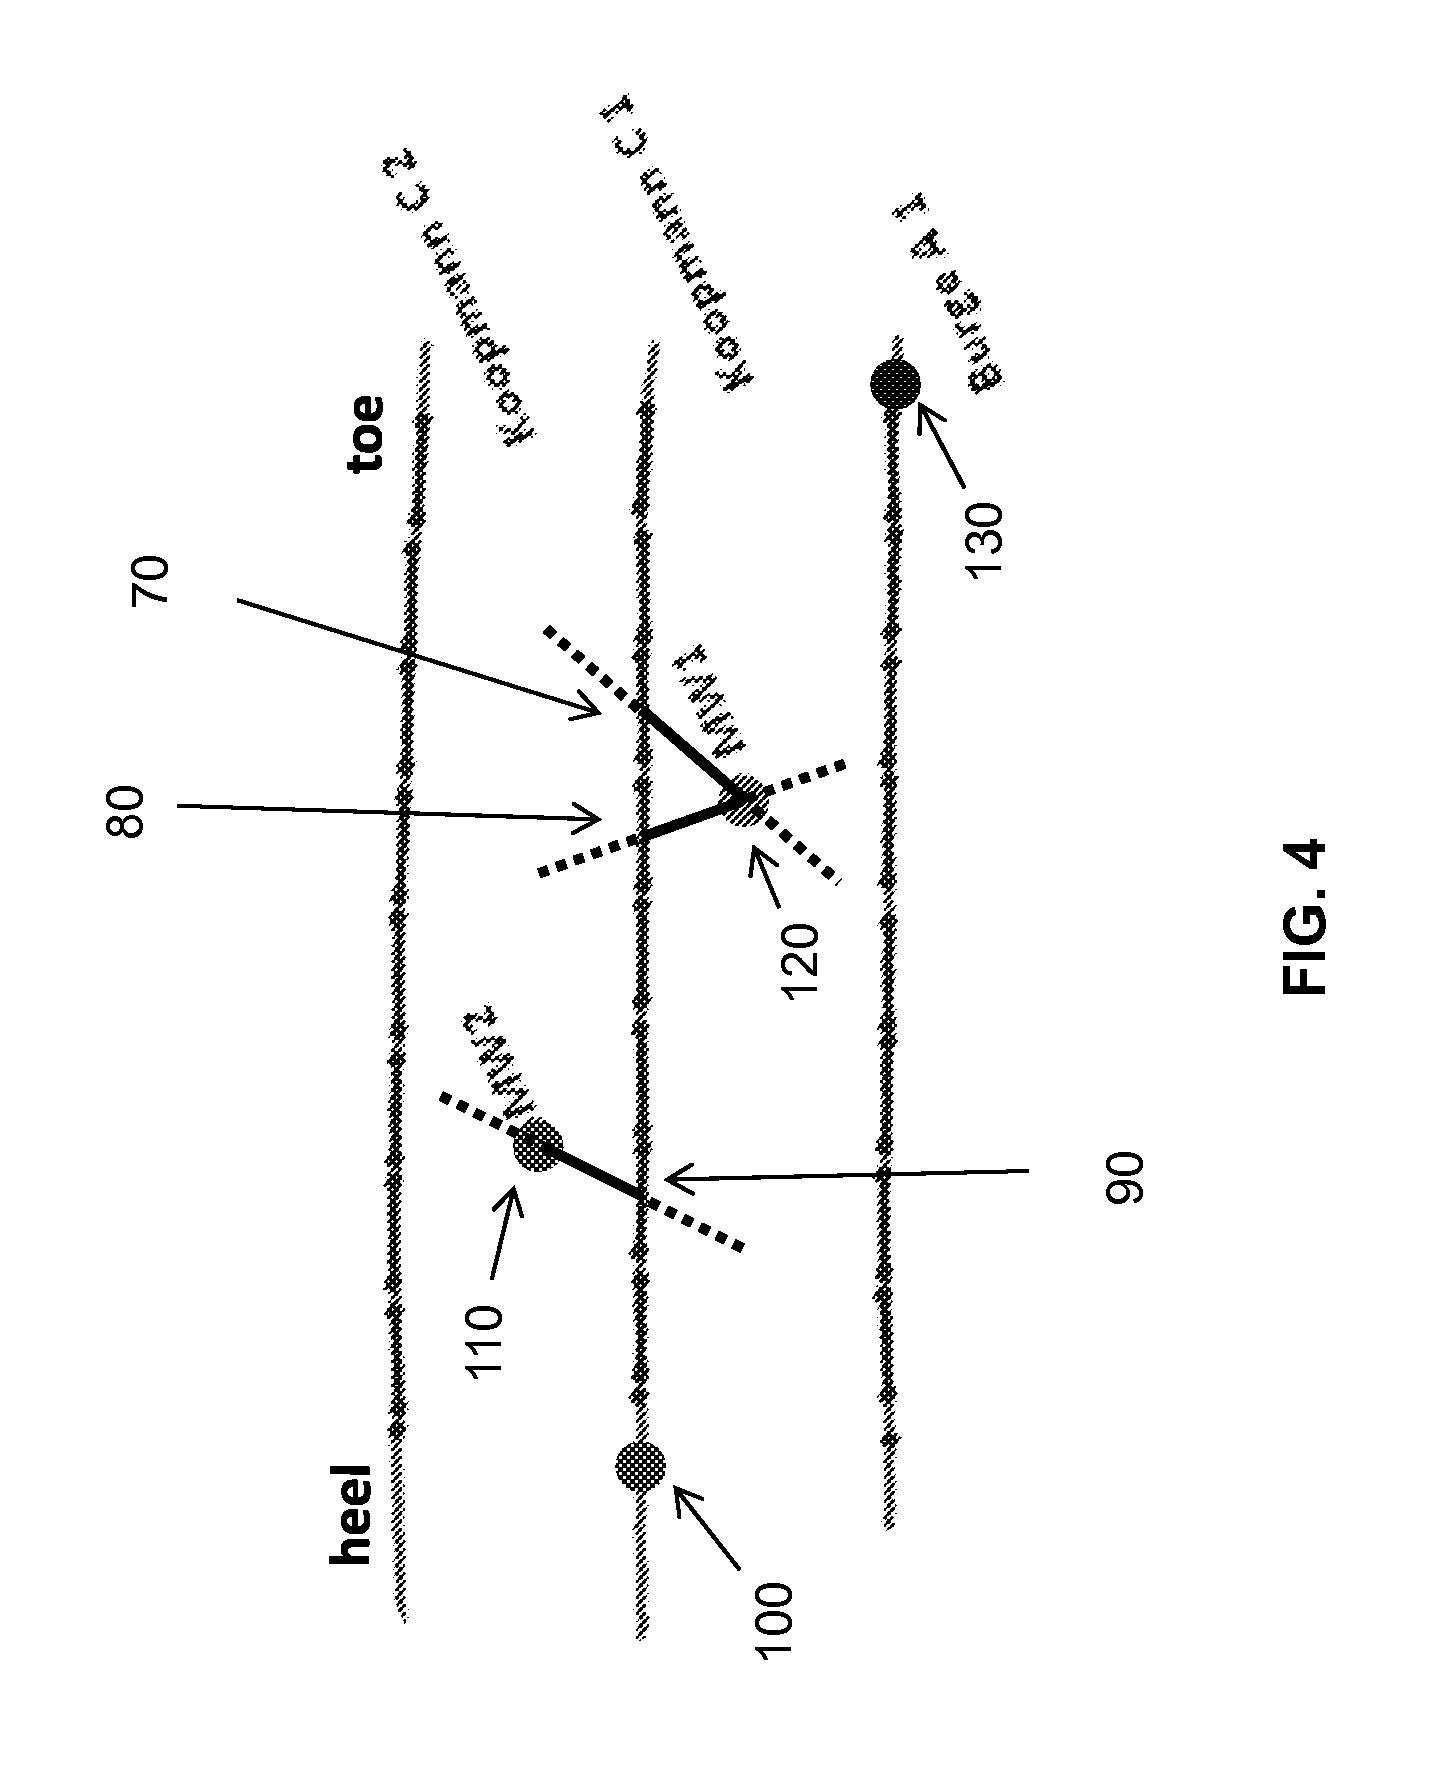 Method for determining hydraulic fracture orientation and dimension